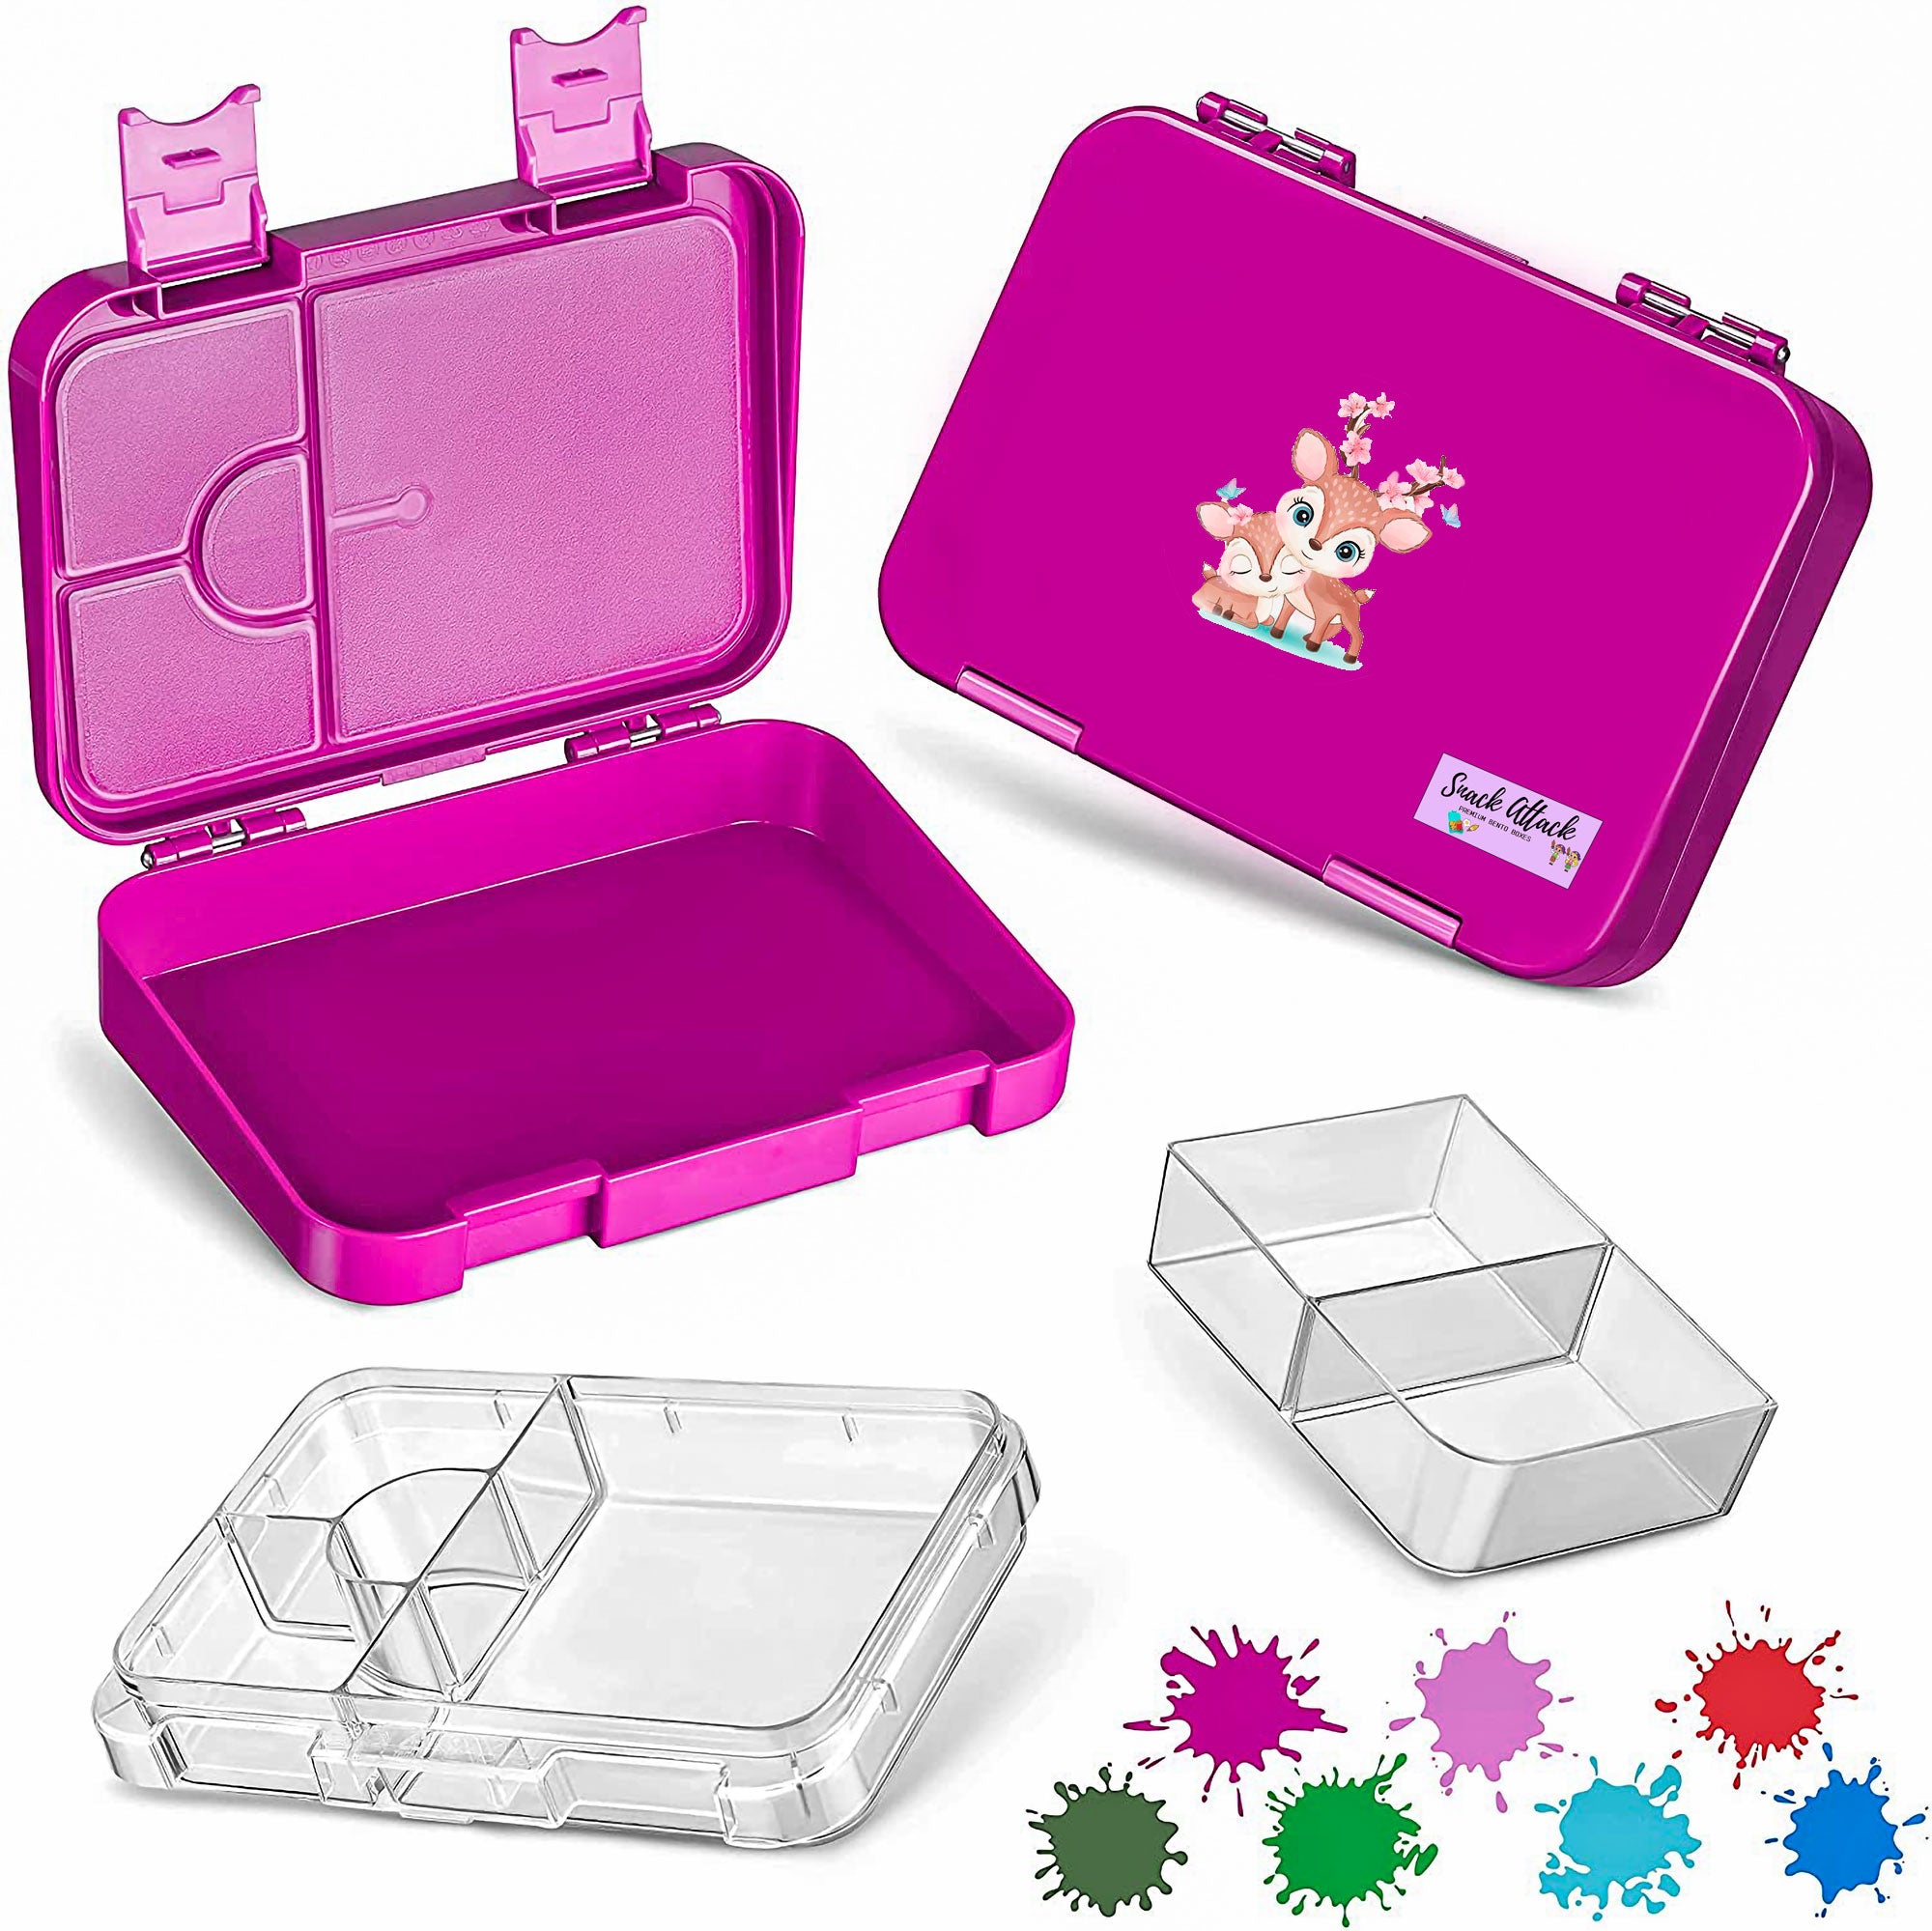 Lunch Box - Lunch Box With Compartments Practical Bento Box With